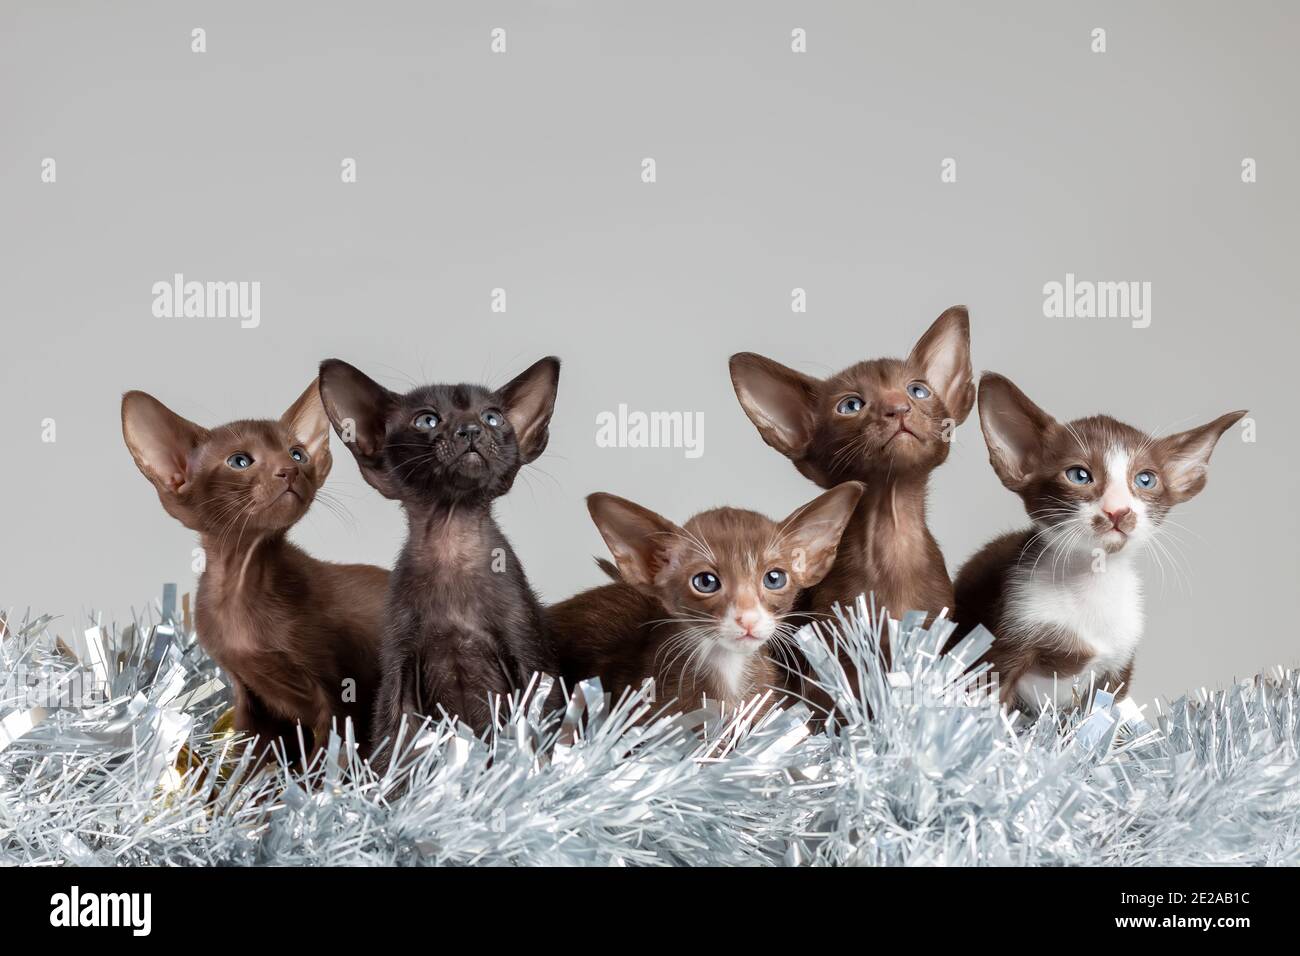 Group of little kittens of oriental cat breed with big ears of brown and black color sitting together among silver tinsel Stock Photo